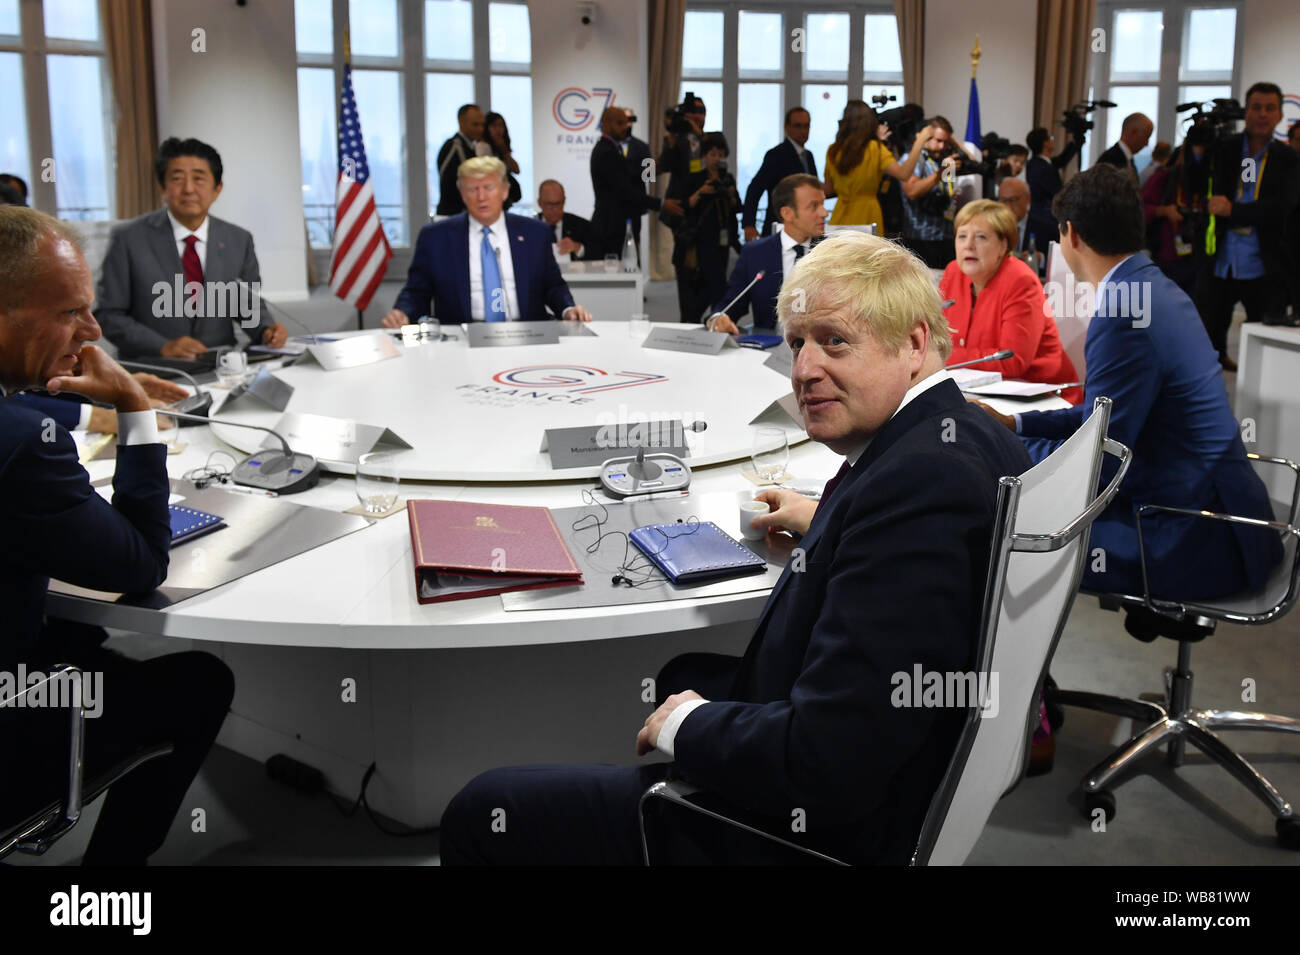 Prime Minister Boris Johnson looks on as Canada's Prime Minister Justin Trudeau, Germany's Chancellor Angela Merkel, European Council President Donald Tusk, France's President Emmanuel Macron, Italy's Prime Minister Giuseppe Conte, Japan's Prime Minister Shinzo Abe and US President Donald Trump meet for the first working session of the G7 summit in Biarritz, France. Stock Photo